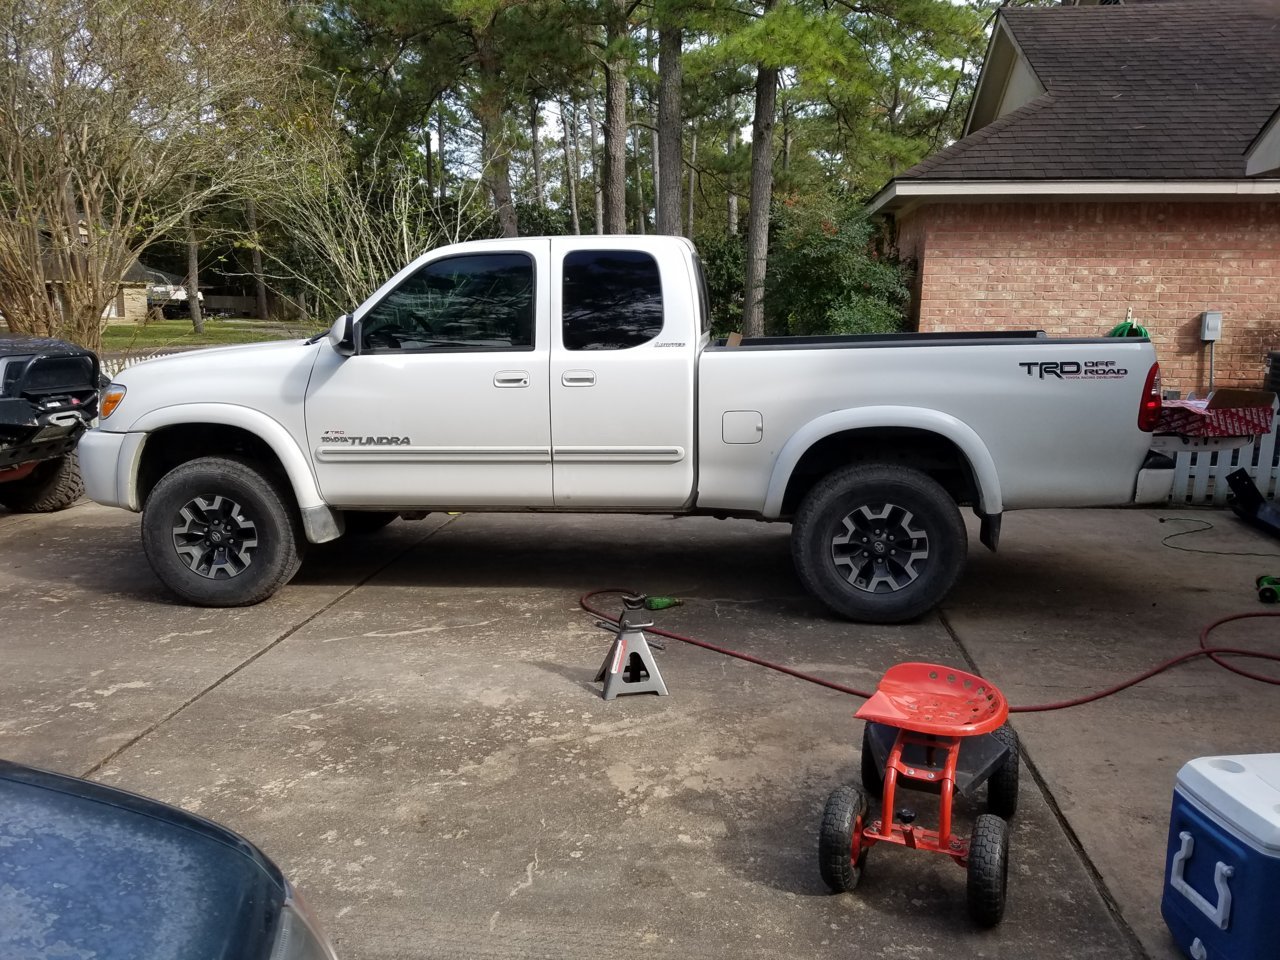 What have you done to your 1st gen Tundra today? 